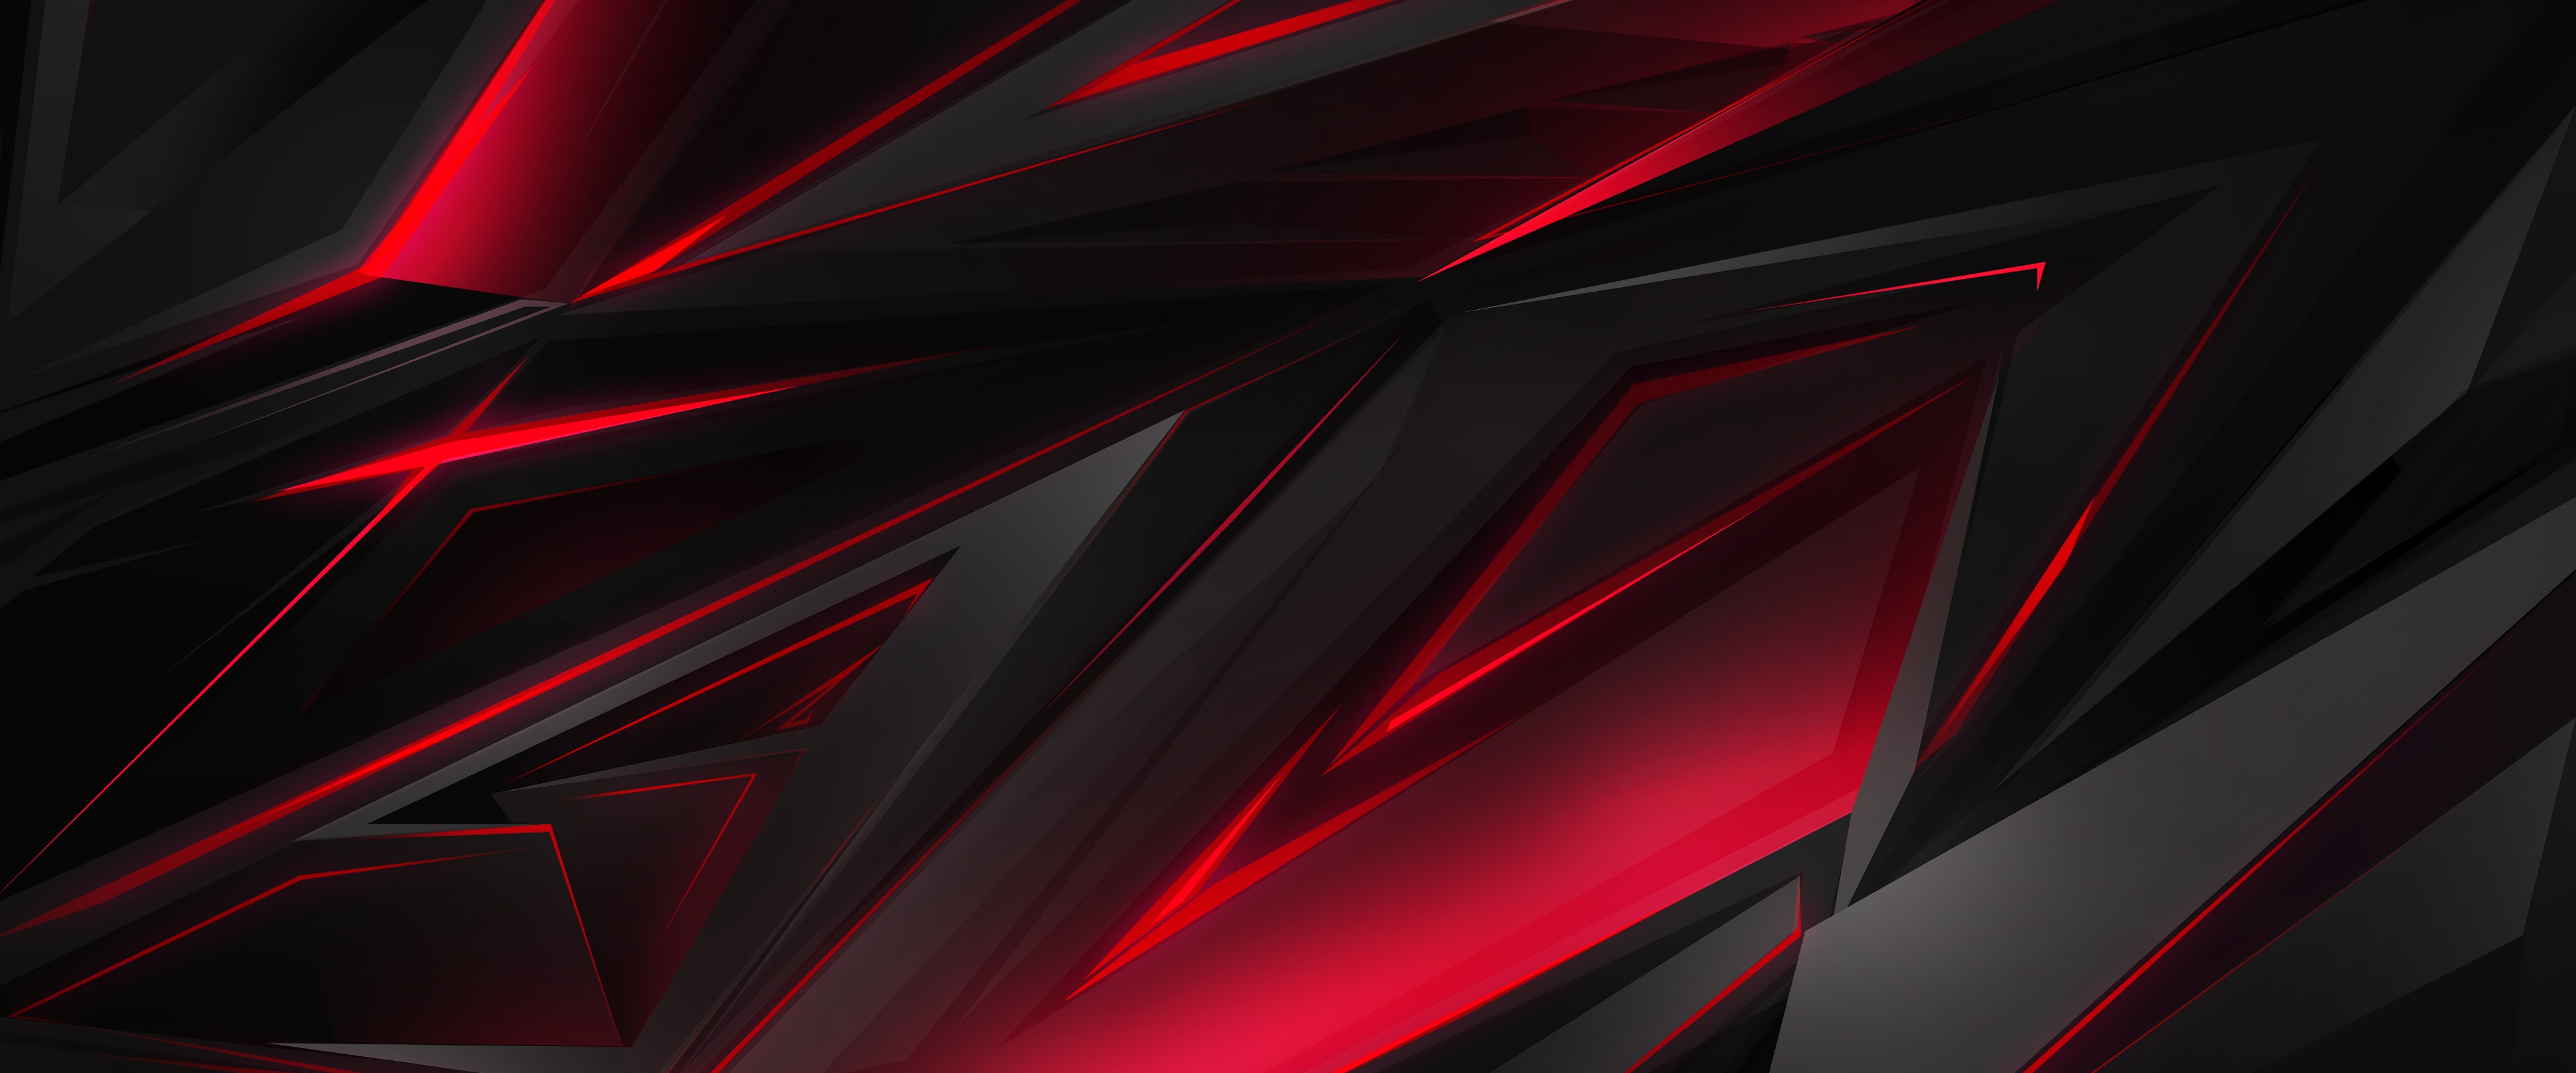 Black Red Abstract Polygon 3d 4k   Red Gaming Wallpaper 4k